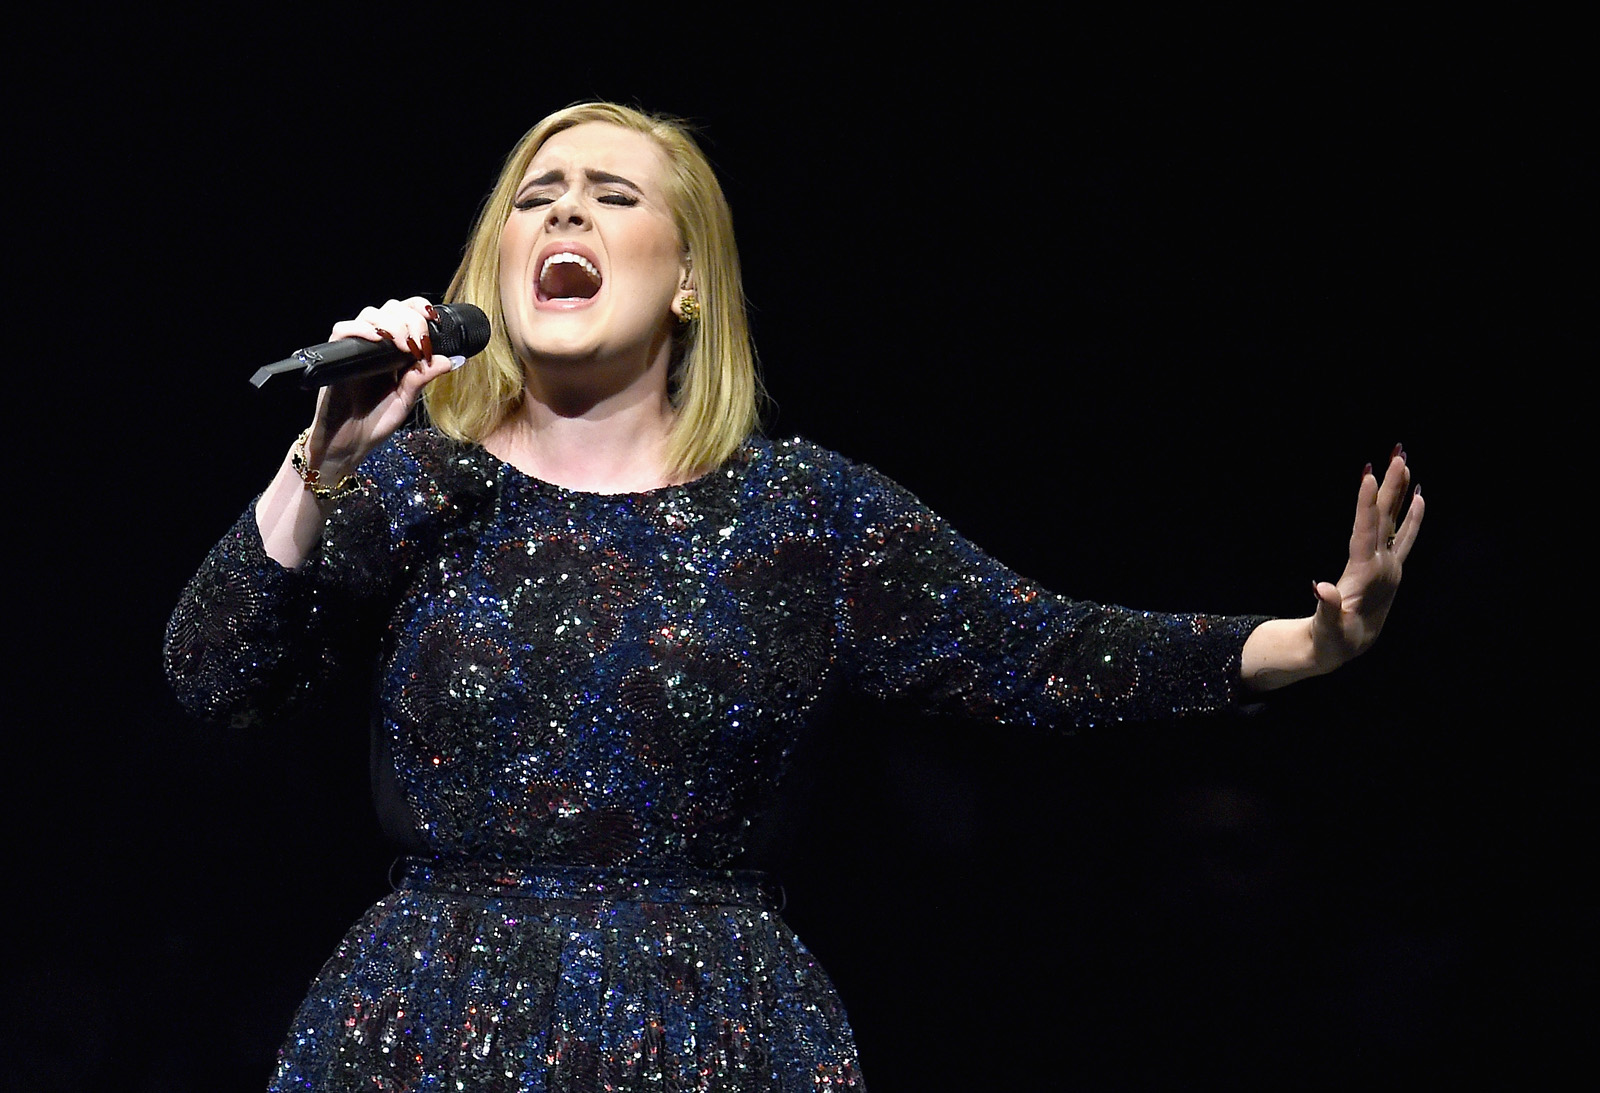 Singer Adele performs on stage during her North American tour at Staples Center on August 5, 2016 in Los Angeles, California.  (Photo by Kevin Winter/Getty Images for BT PR)